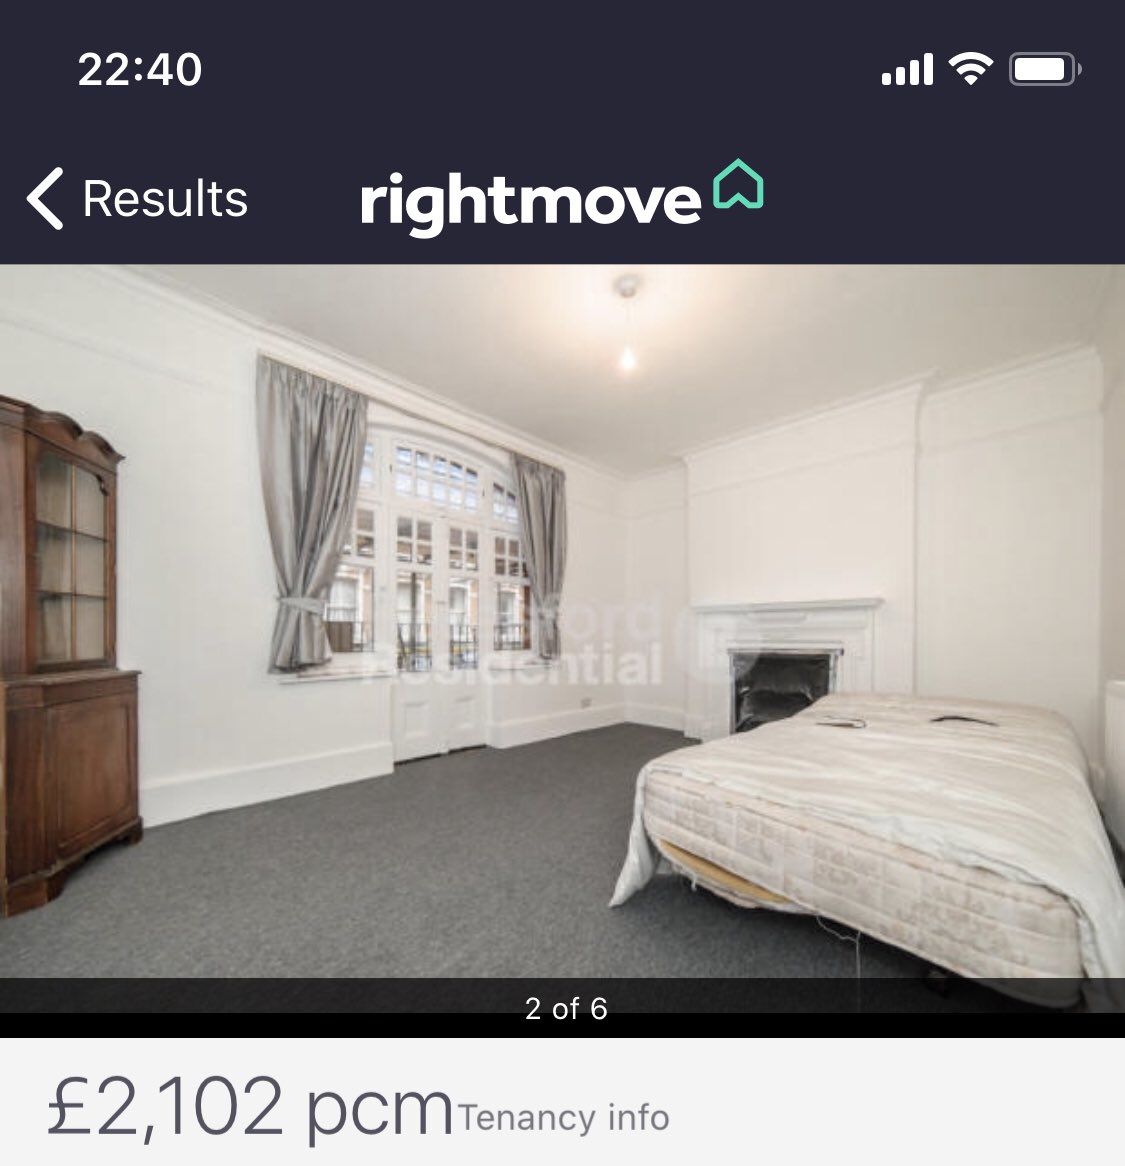 We didn’t get the flat :( someone scooped in with a similar offer but was faster. Heartbroken, but the  #londonrental show must go on. Sad I have to still look at properties that either have abysmal design choices or are simply f-ing dirty & still over 2k (notice the bed). Gross